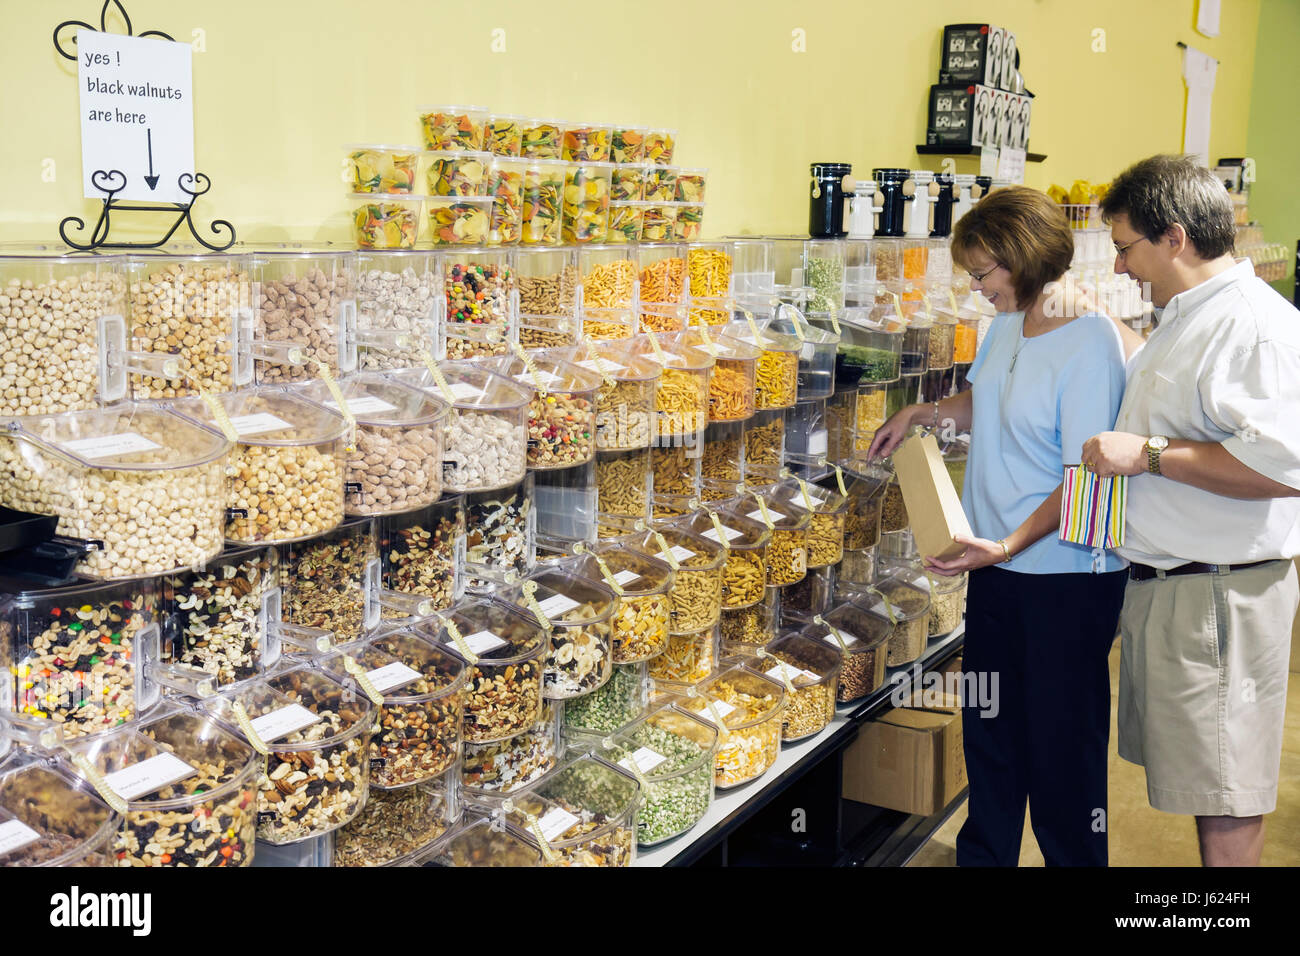 Chesterton Indiana,Molly Bea's Ingredients,shopping shoppers selling retail store business,grains nuts trail mix bulk bins containers self serve man w Stock Photo